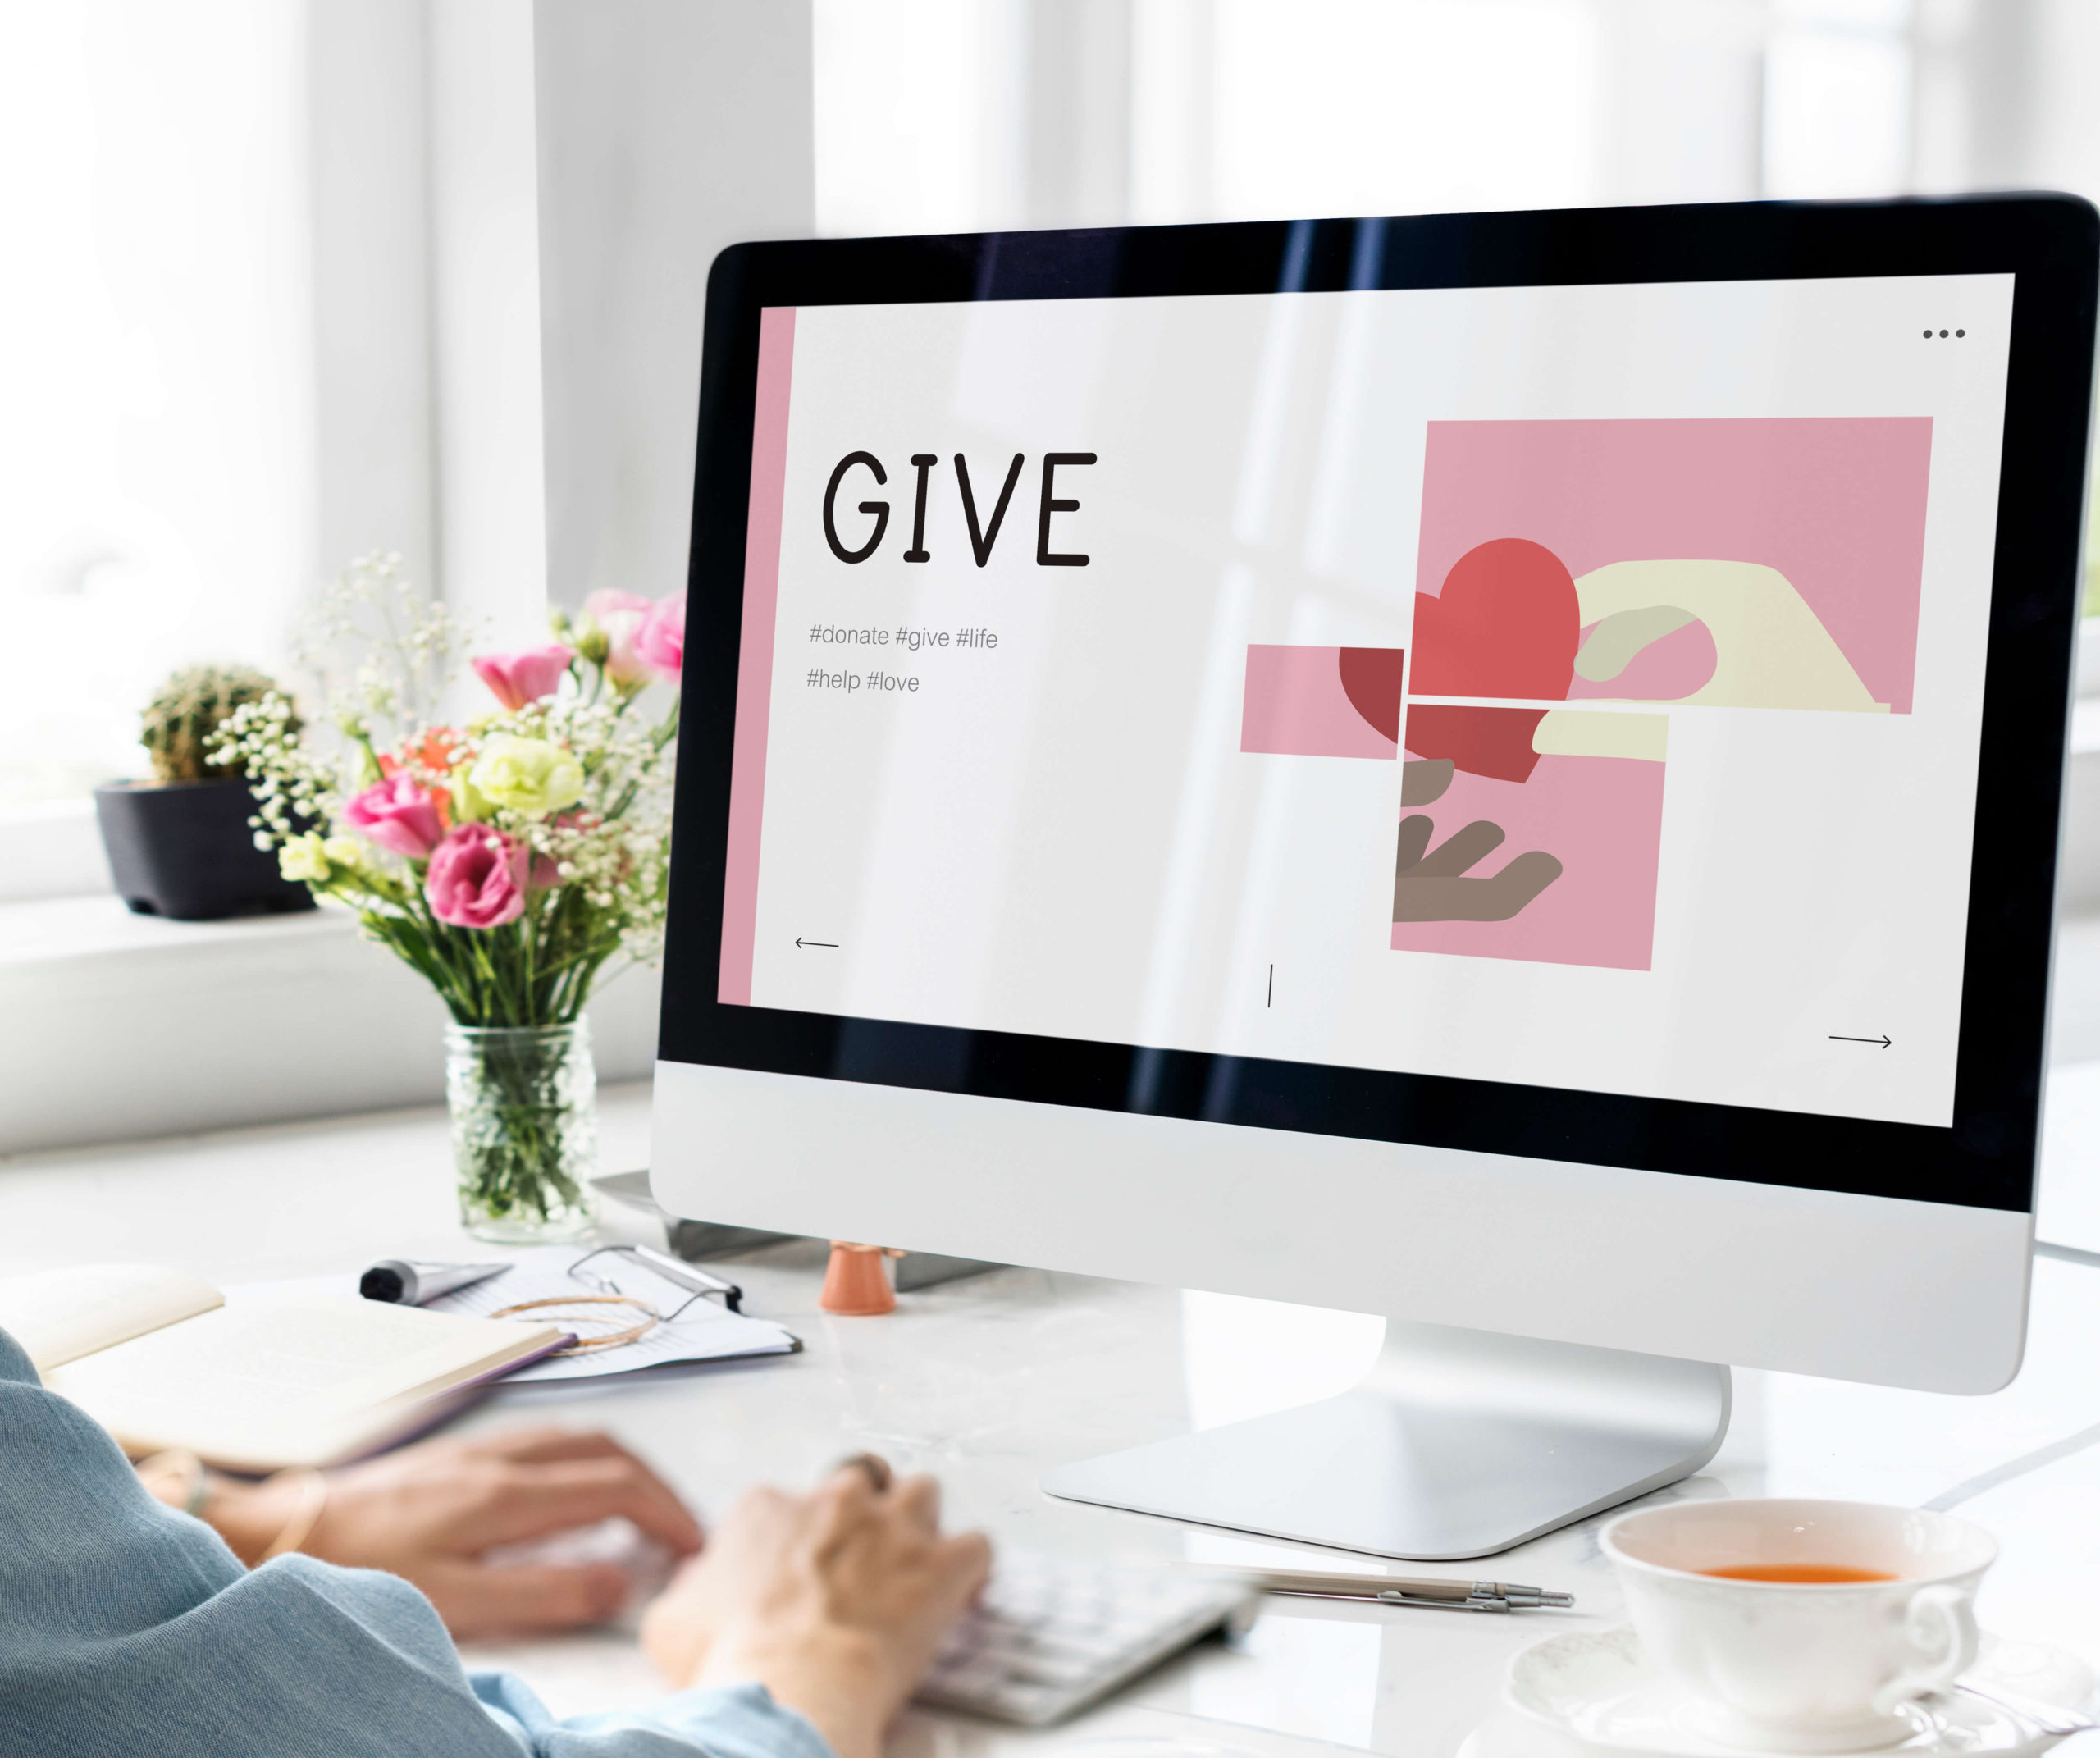 Creating a Culture of Giving: How Nonprofits Can Encourage More Donations from Supporters